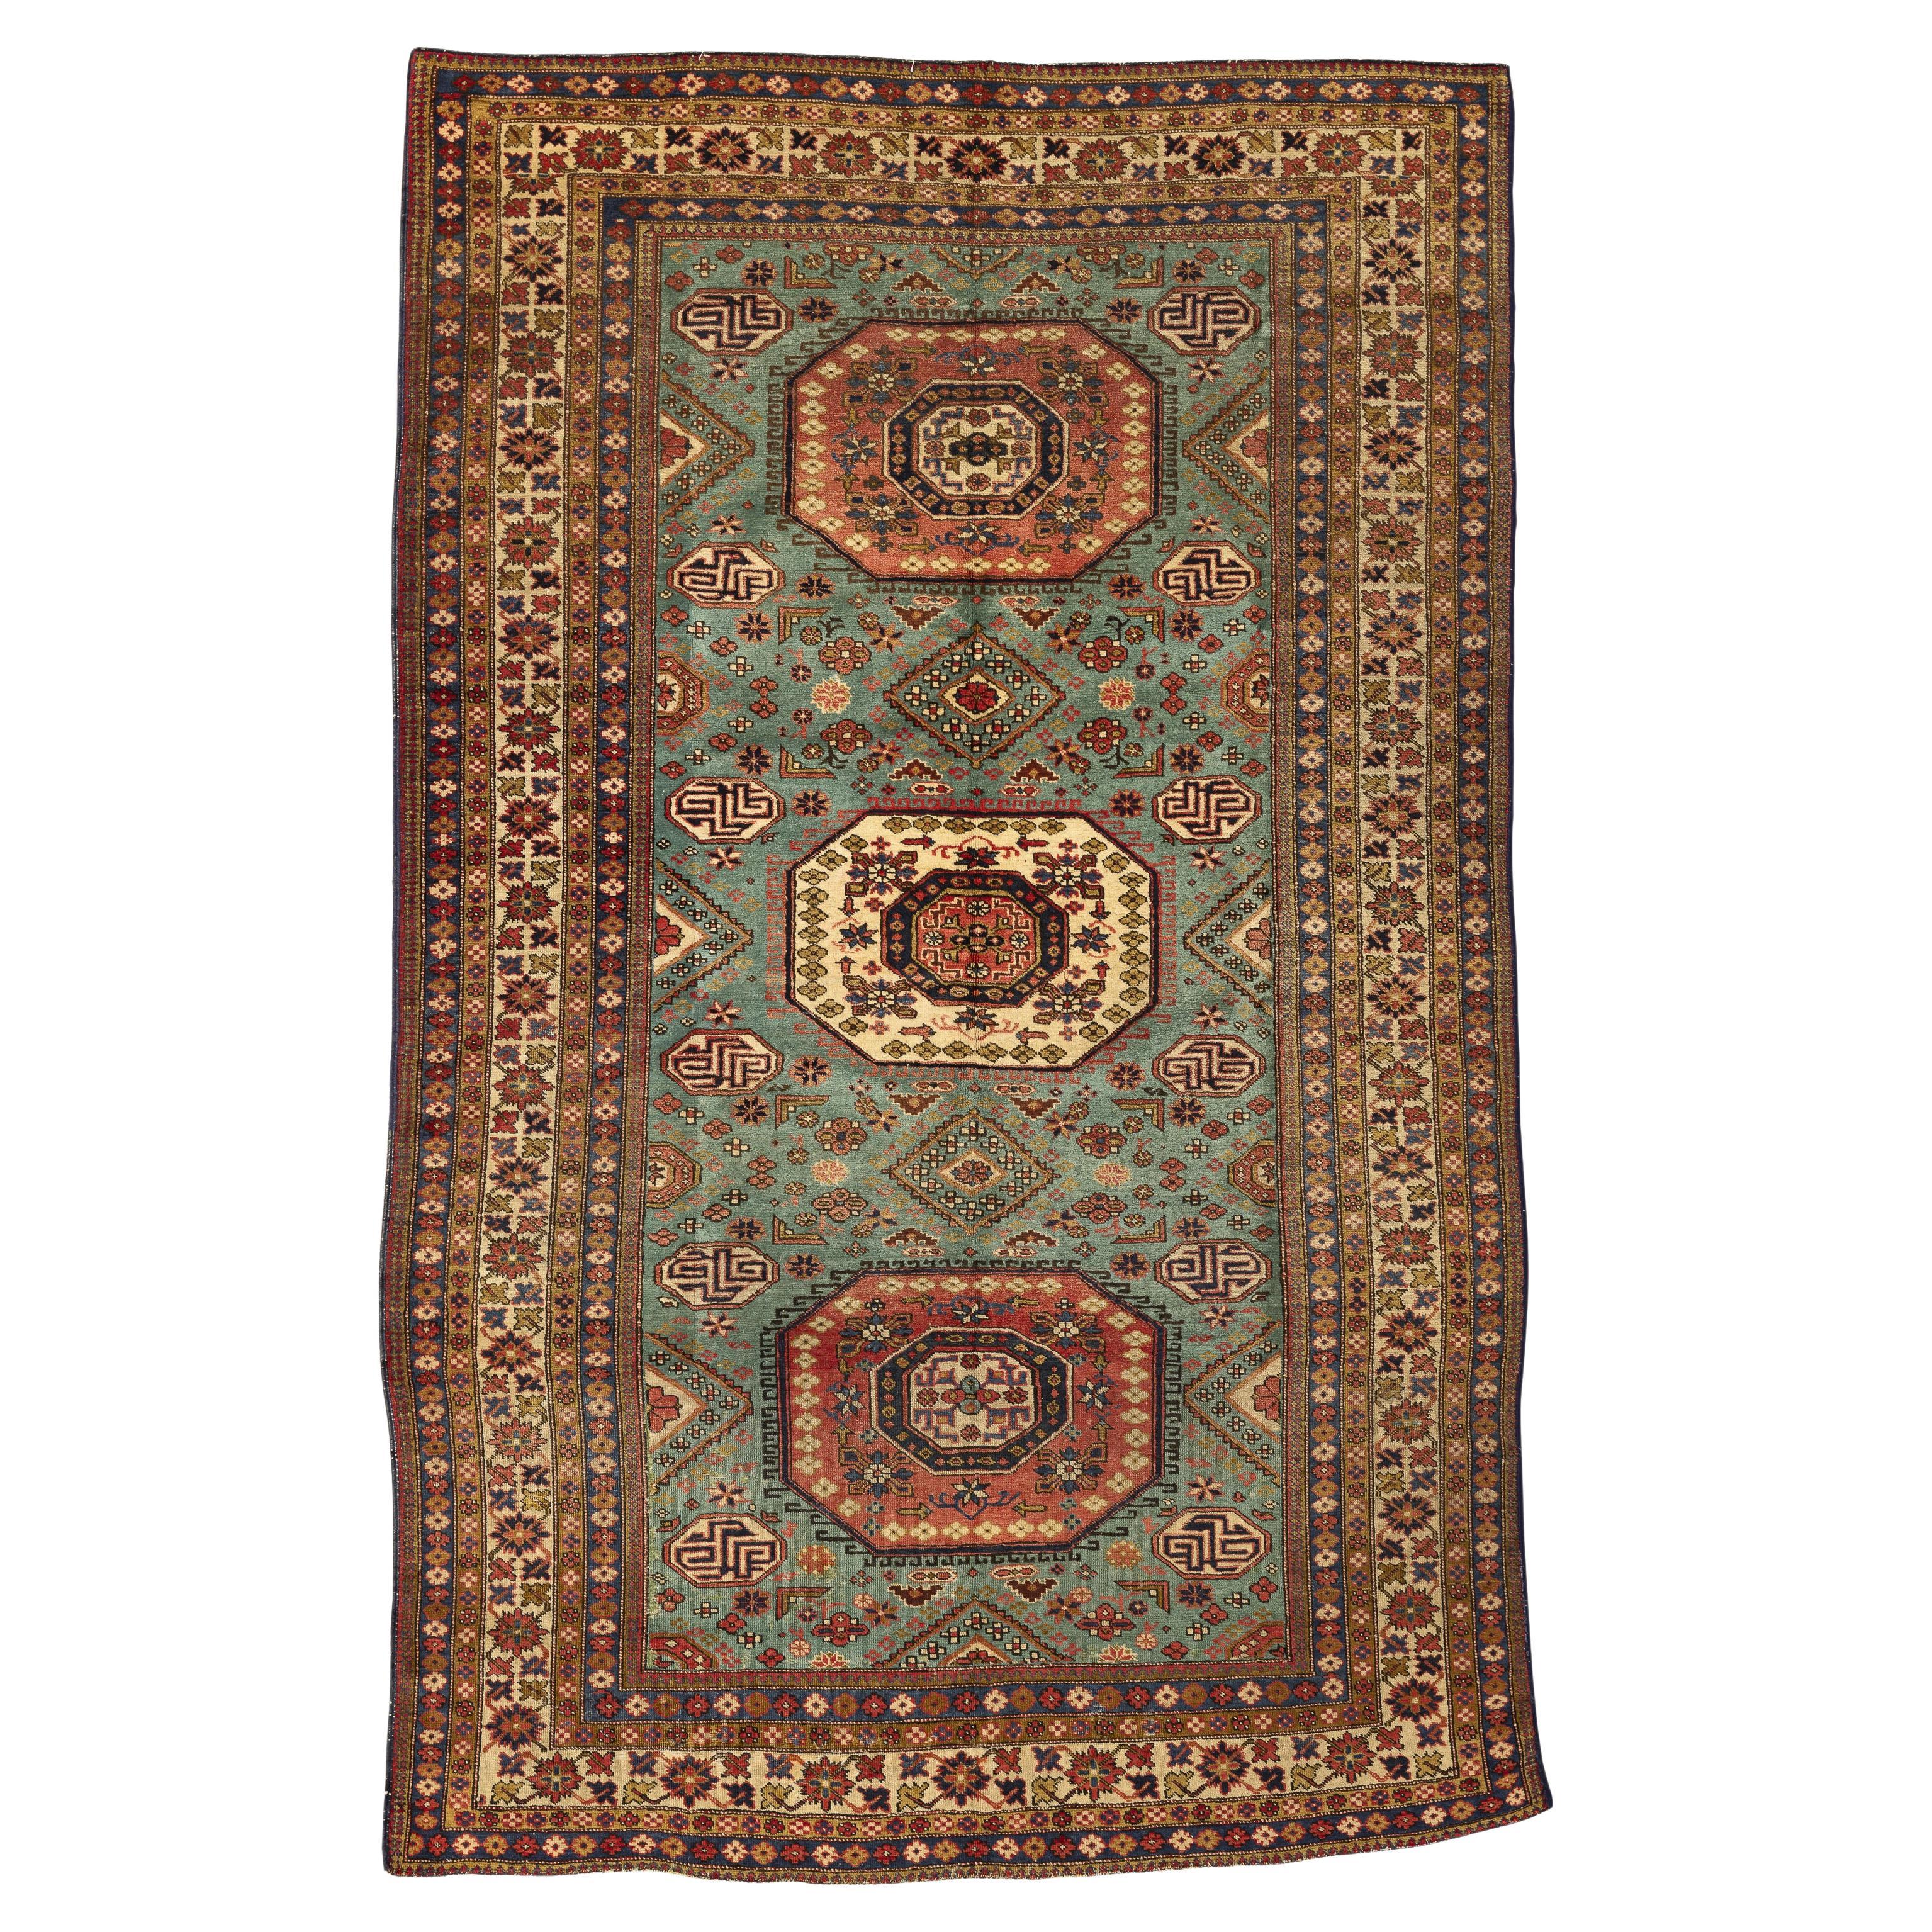 Kazak – Central Caucasus

The singular mastery and the masterful combination of colours give this piece of art a striking presence in the highest region of the Caucasus Mountains. Designs passed down for centuries between families of carpet makers